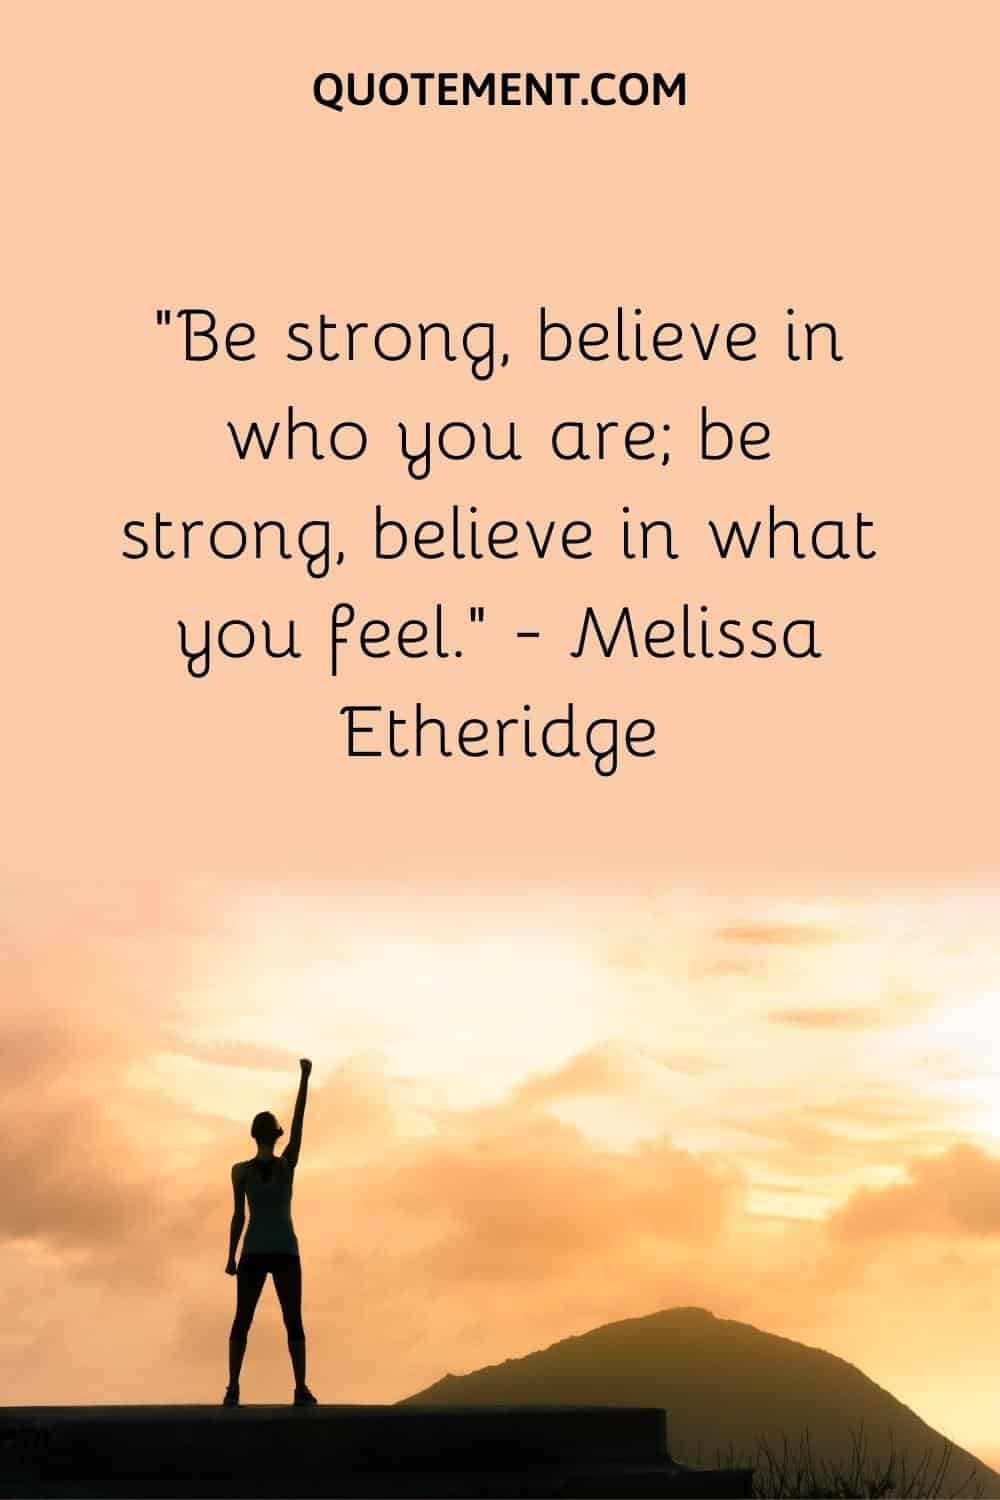 Be strong, believe in who you are; be strong, believe in what you feel.